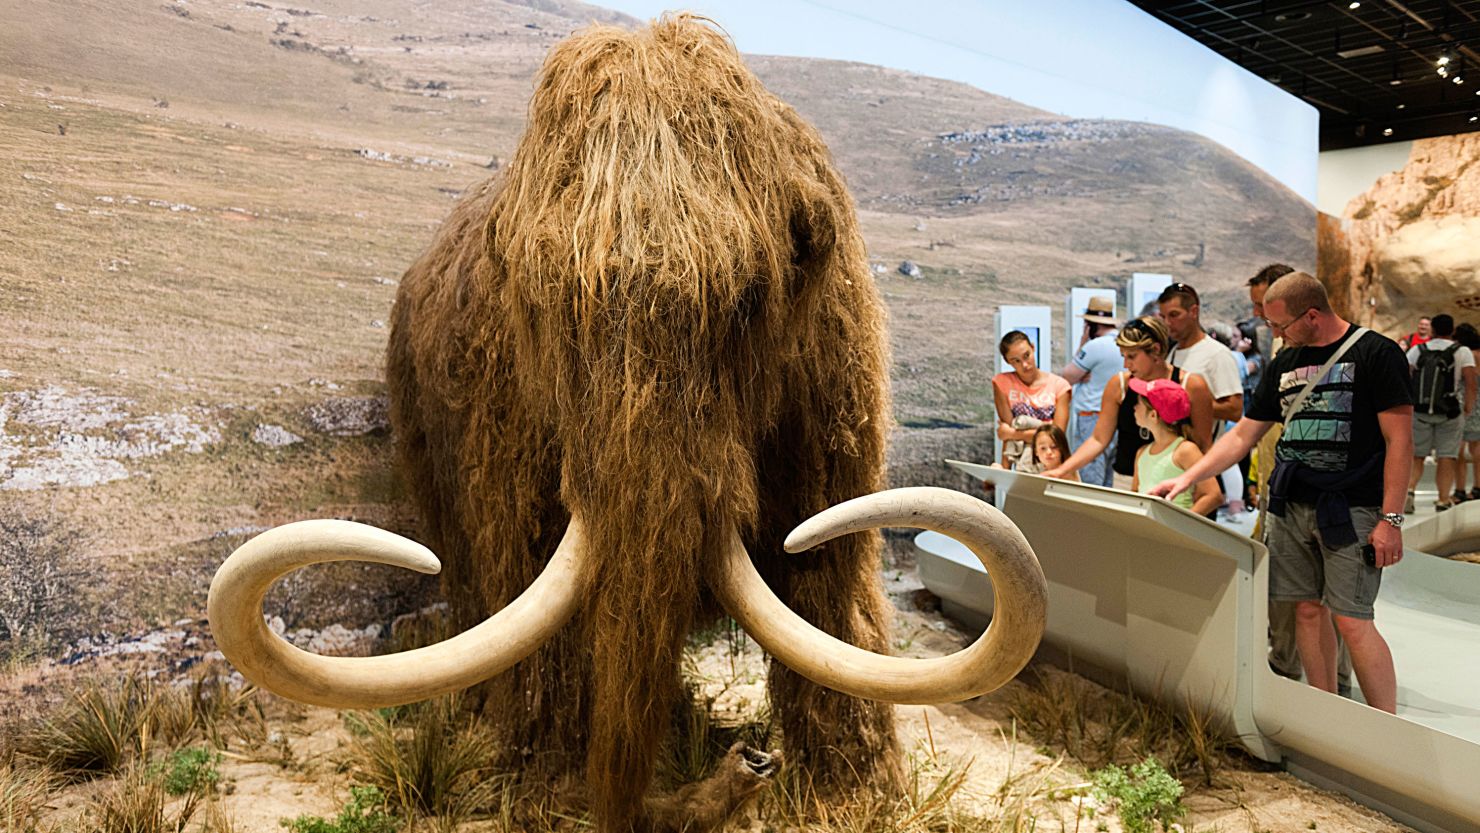  A diorama of a group of humans interacting with a woolly mammoth in a prehistoric setting.